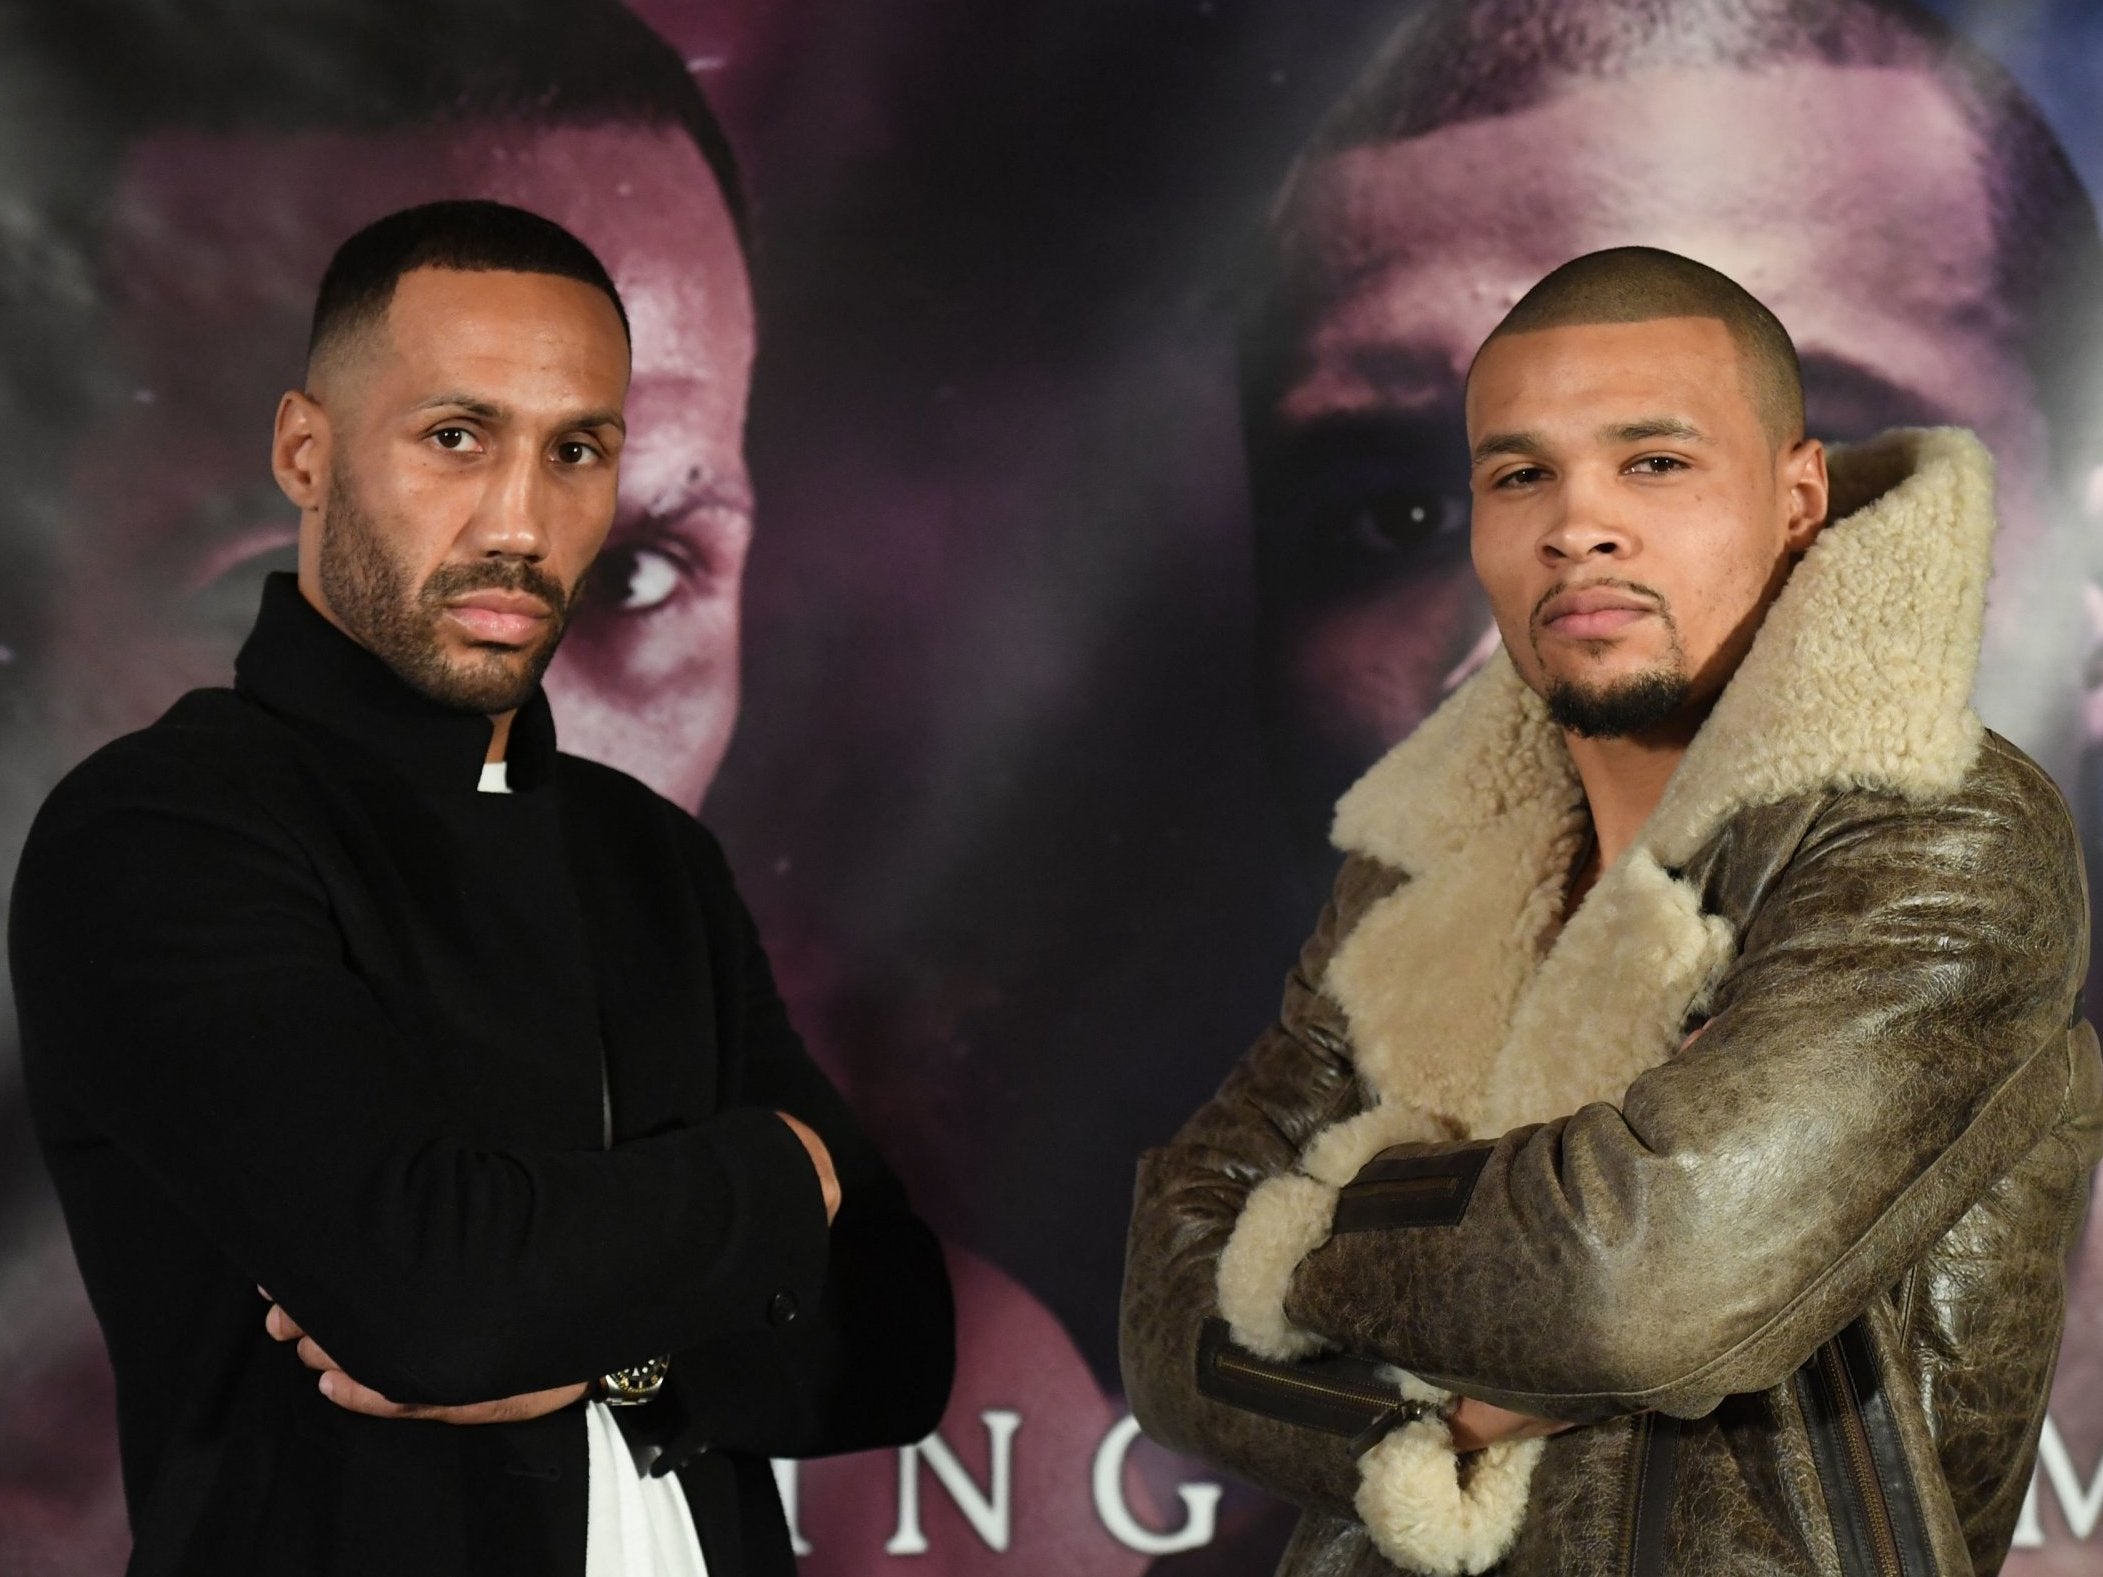 DeGale and Eubank Jr will settle their feud next month